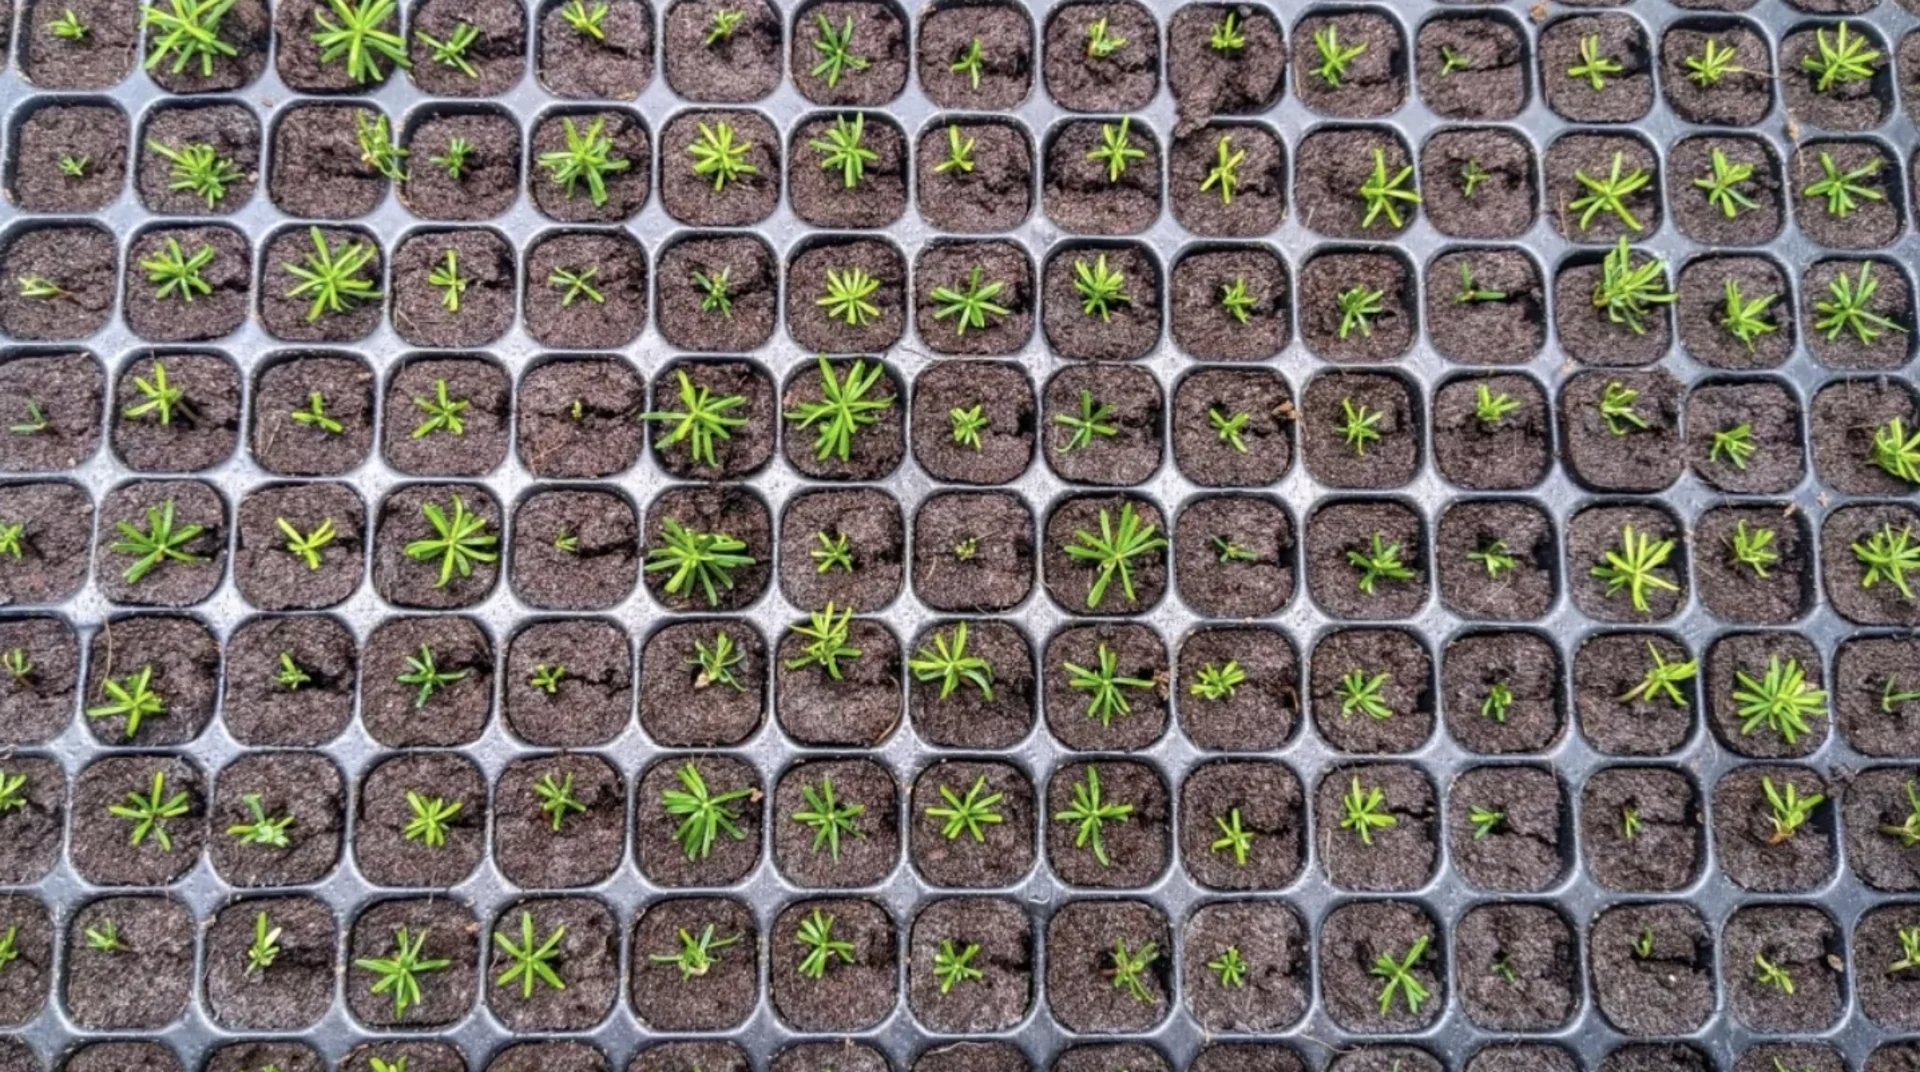 CBC: SMART tree shareholders will have first choice to buy the seedlings, and then any overproduction would be available to other growers, which they expect will happen soon. (Shane Hennessey/CBC )